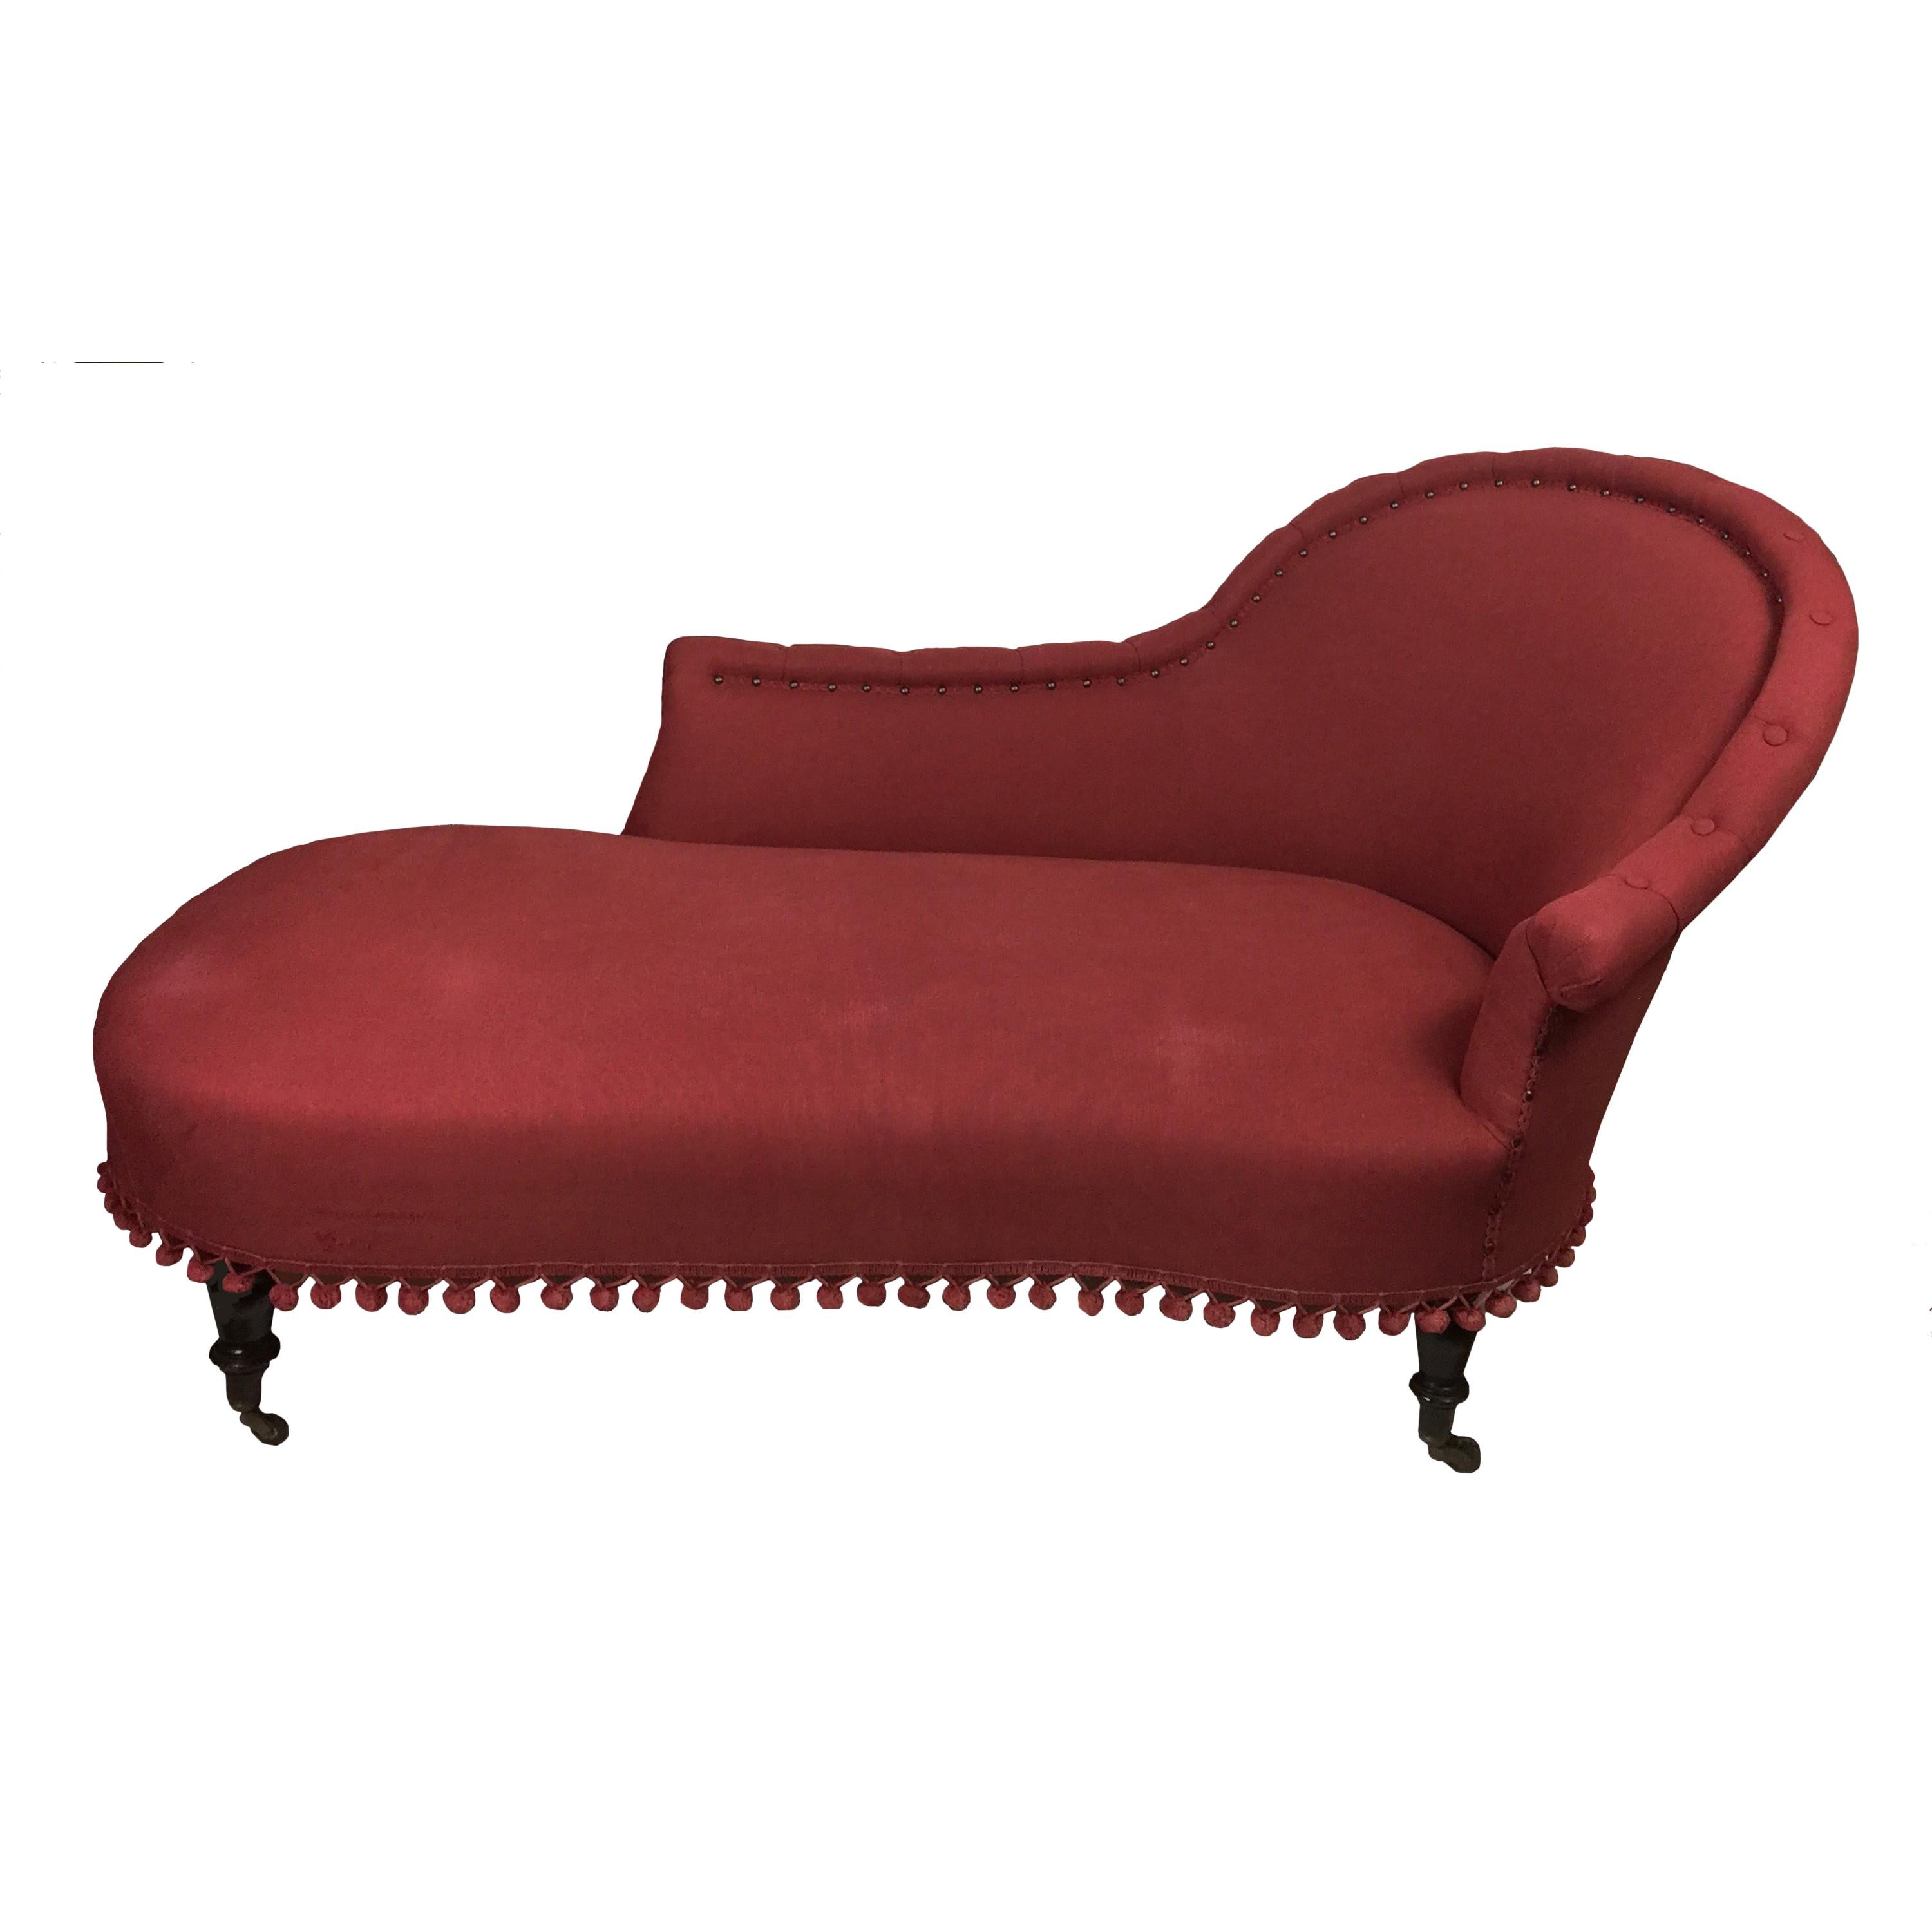 Late Victorian Chaise Longue Méridienne Shape with Turned Mahogany Legs For Sale